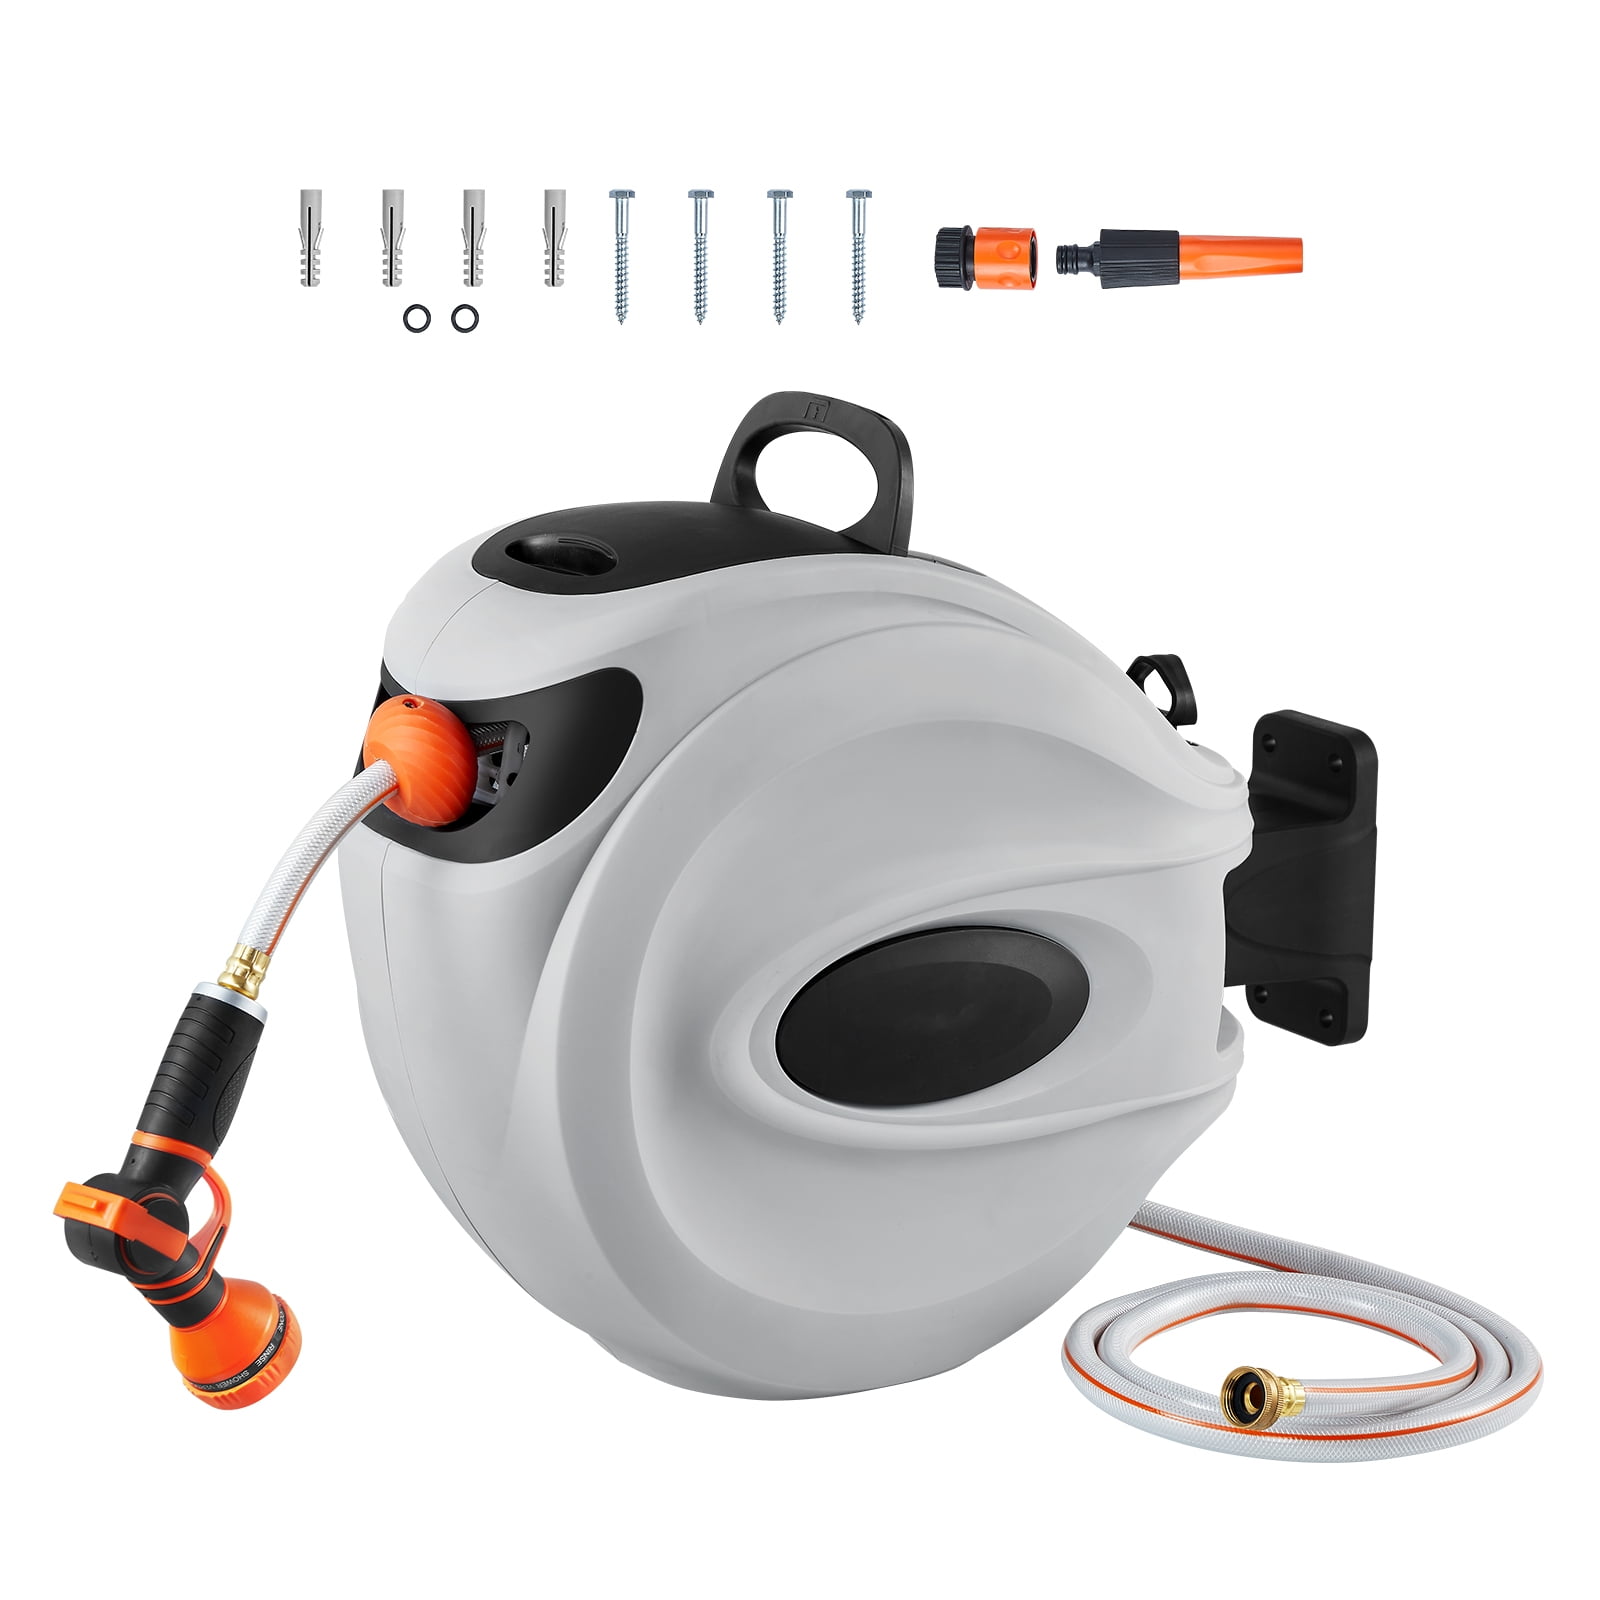 Tools Retractable Garden Hose Reel 100ft x 1/2 with 9 Pattern Hose Nozzle, Wall  Mounted Water Hose Reel Automatic Rewind with Any Length Lock and 180°  Swivel Bracket 